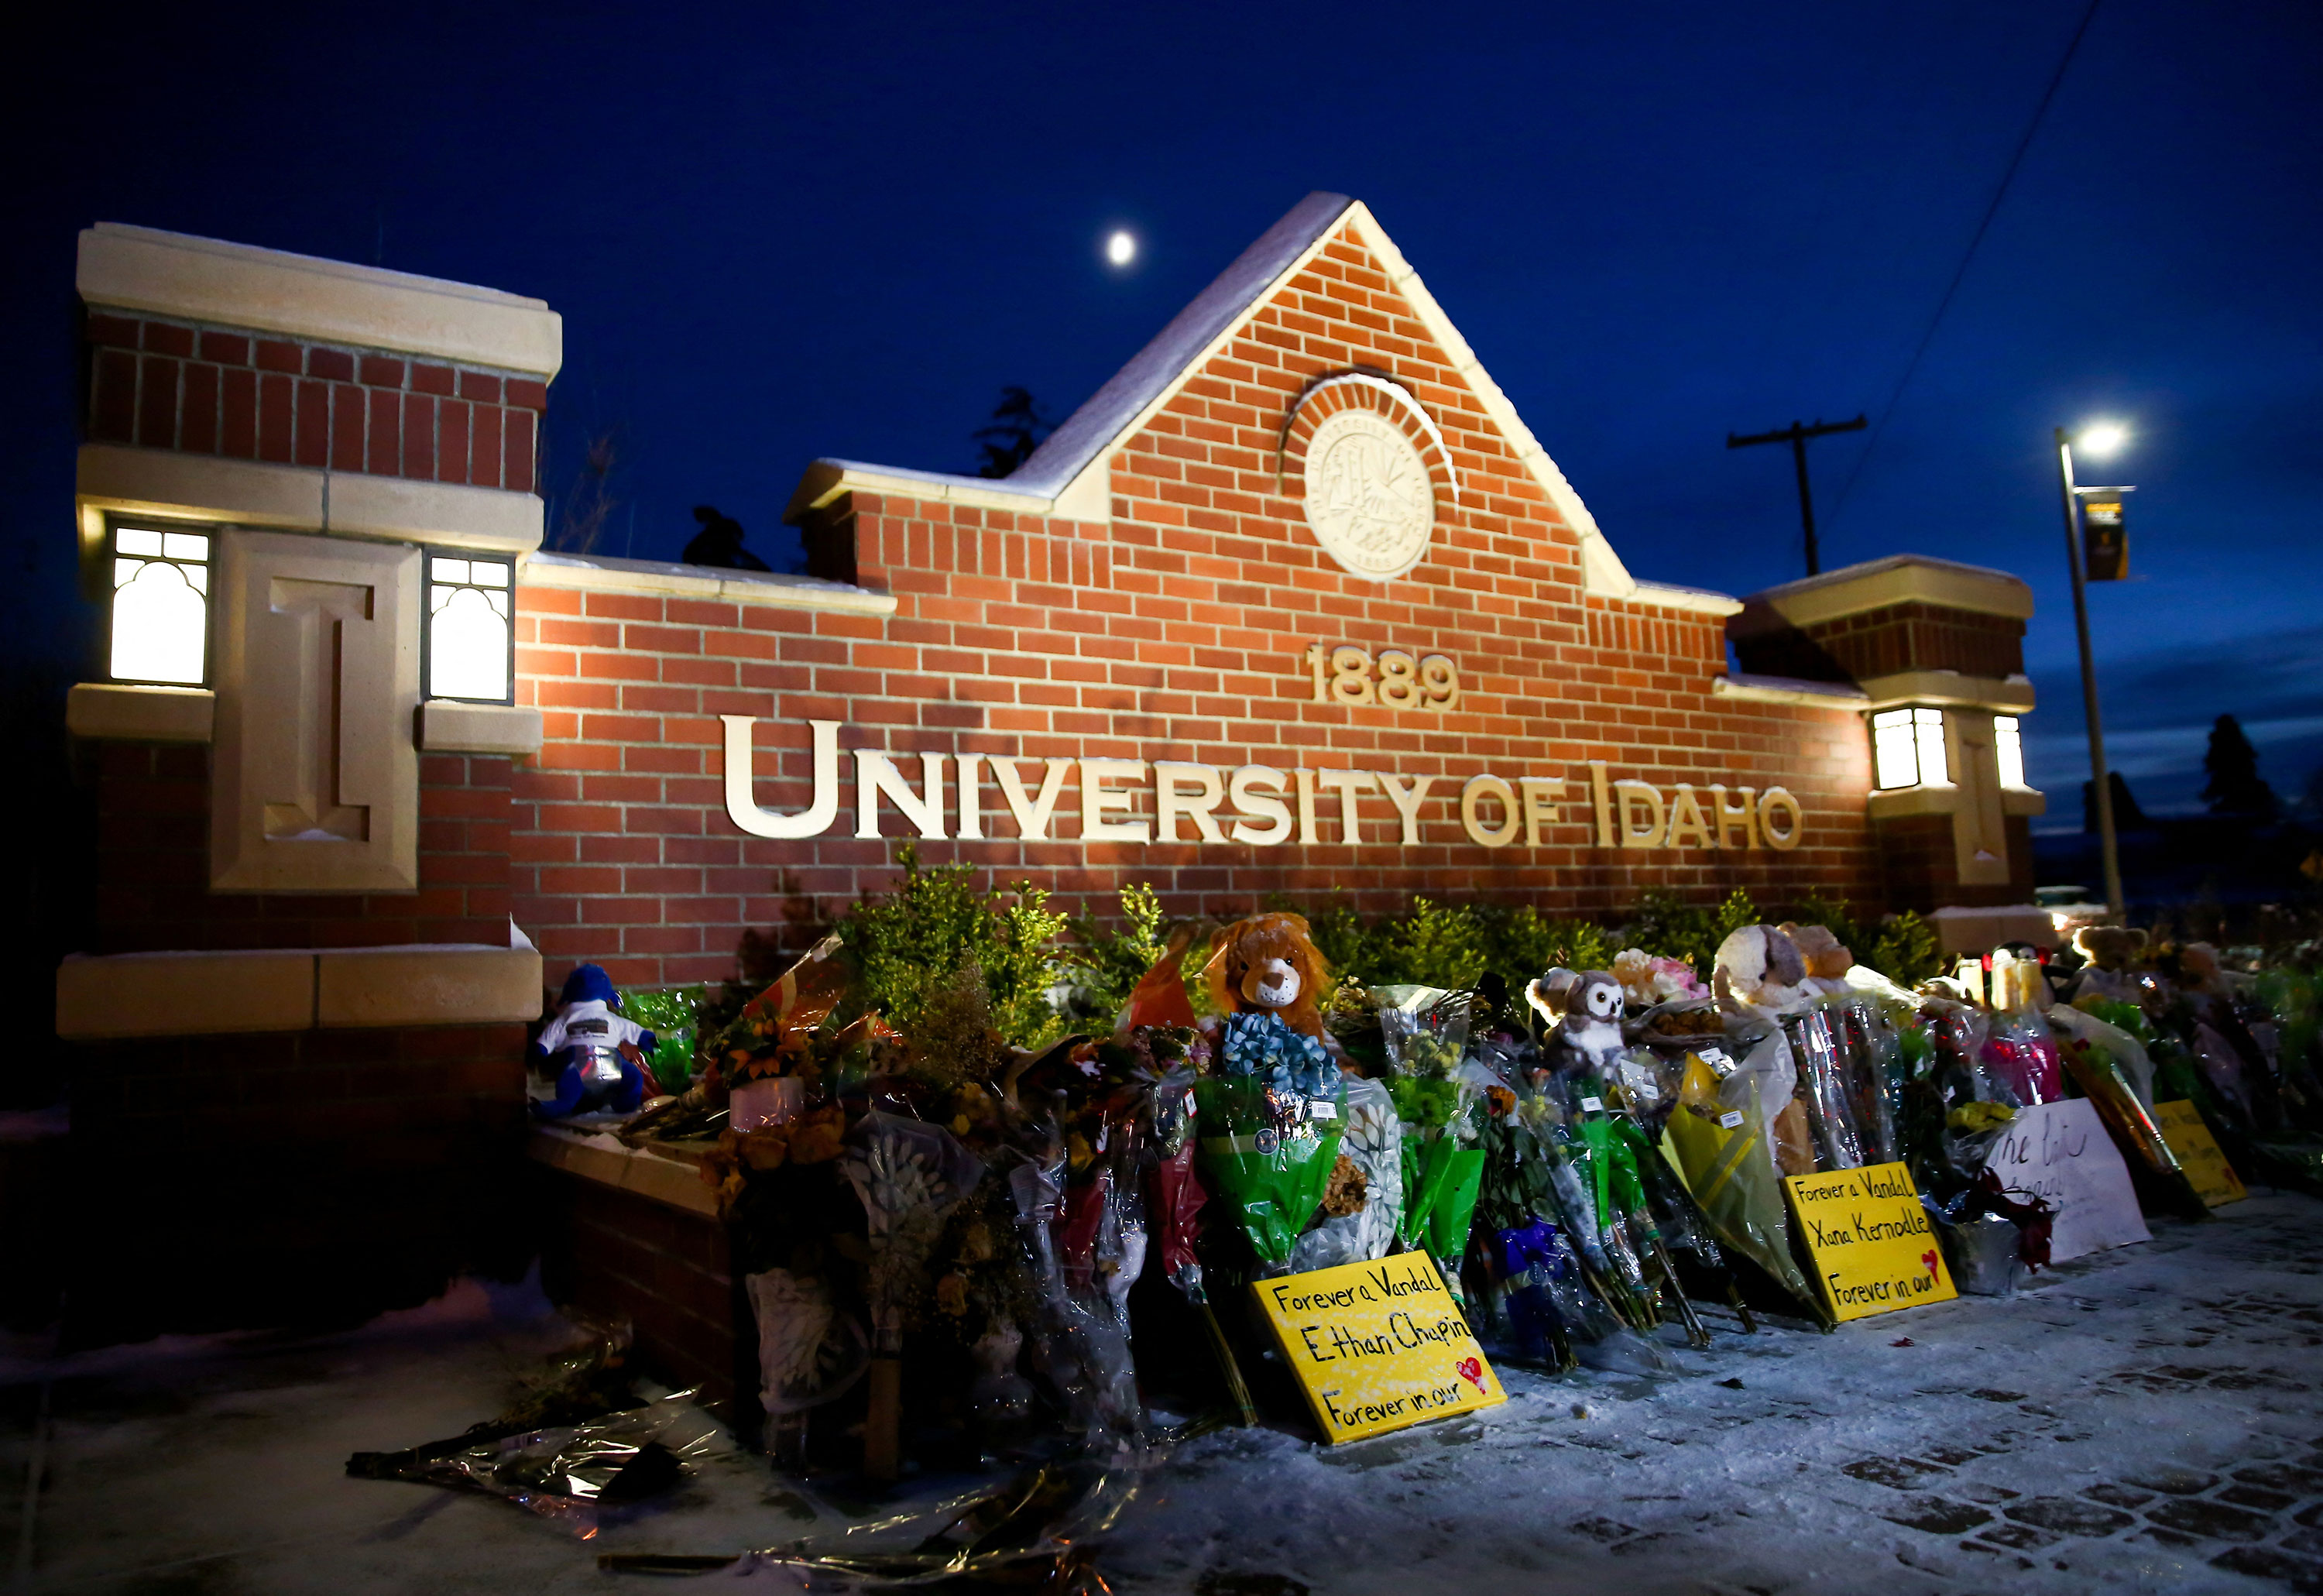 A memorial is seen in front of a University of Idaho campus sign in Moscow, Idaho, on November 29.